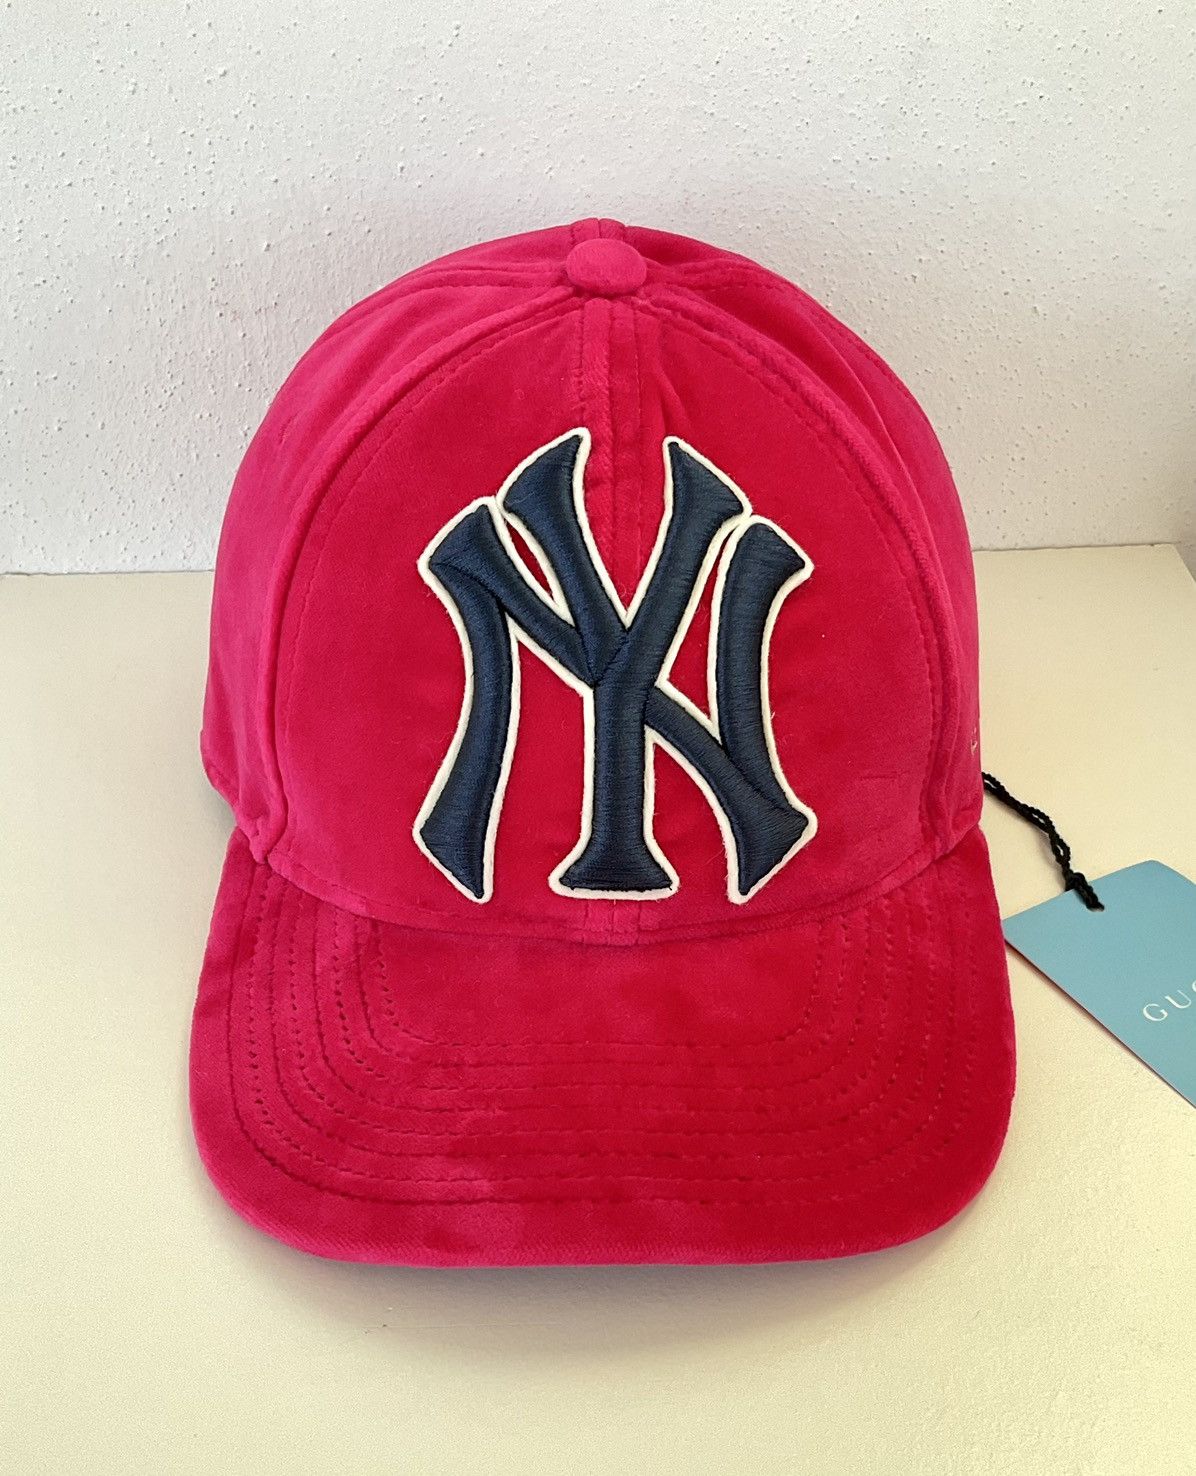 Gucci Gucci x New York Yankees velvet cap Playboi Carti Size ONE SIZE - 2 Preview